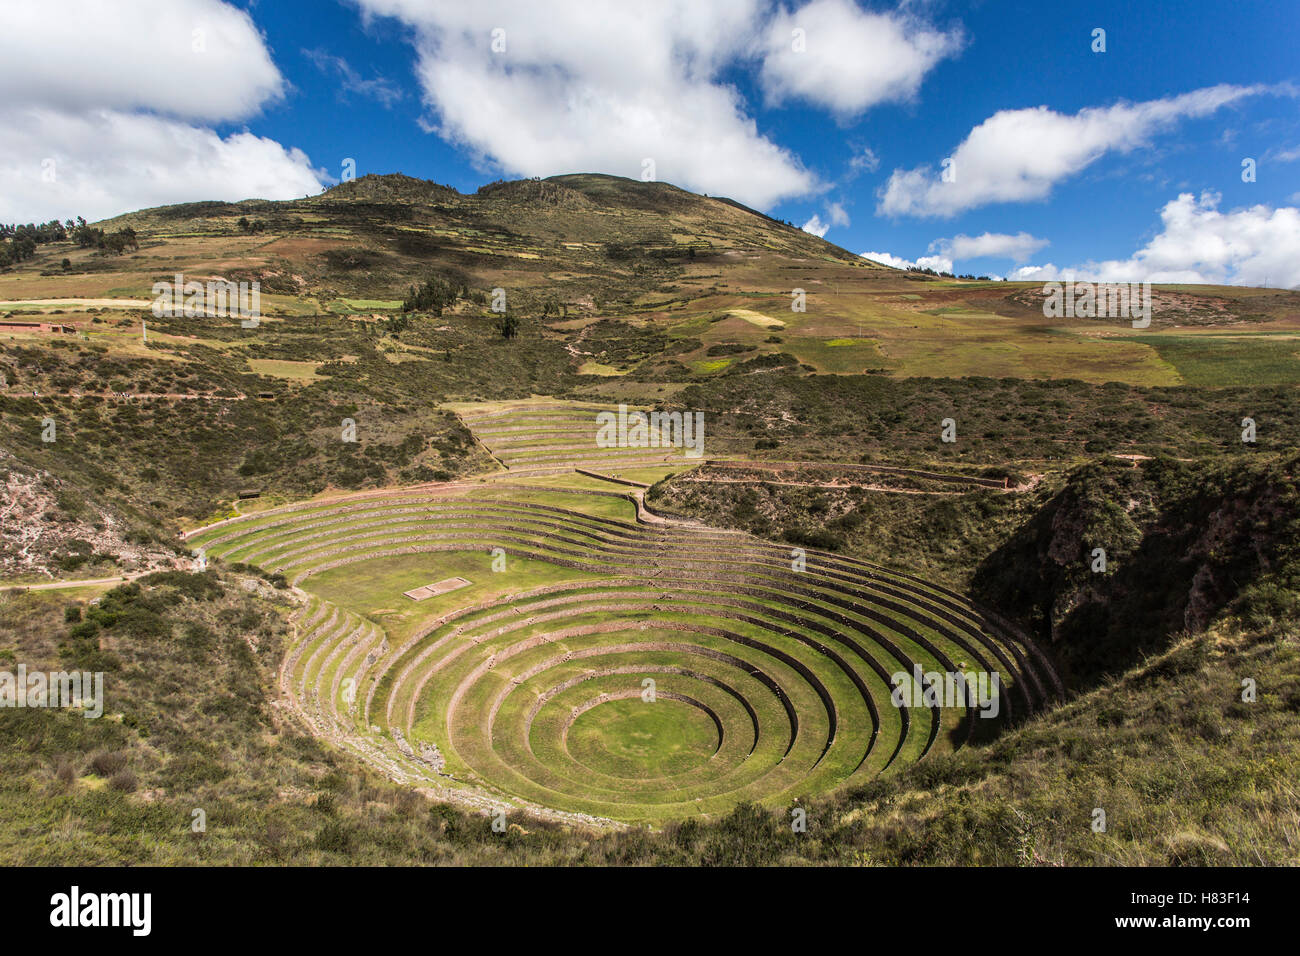 The Incan agricultural terraces at Moray Stock Photo